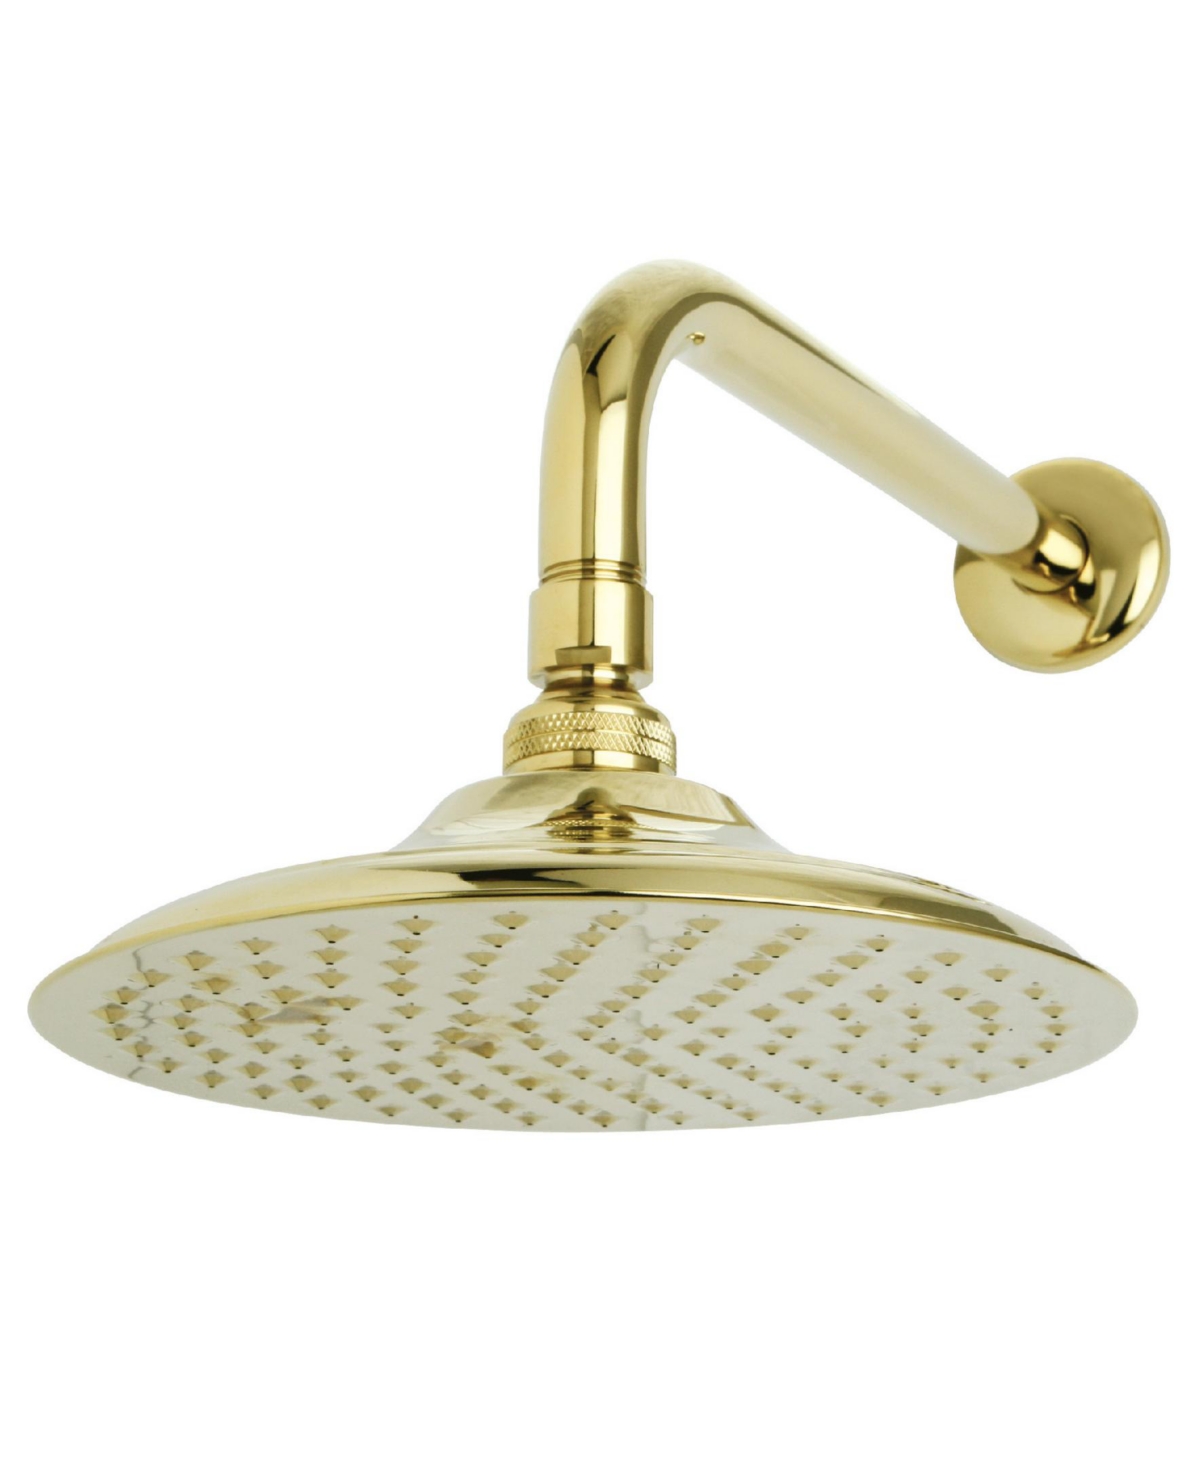 Kingston Brass Victorian 8-Inch Od Brass Shower Head with 12-Inch Shower Arm in Polished Brass Bedding